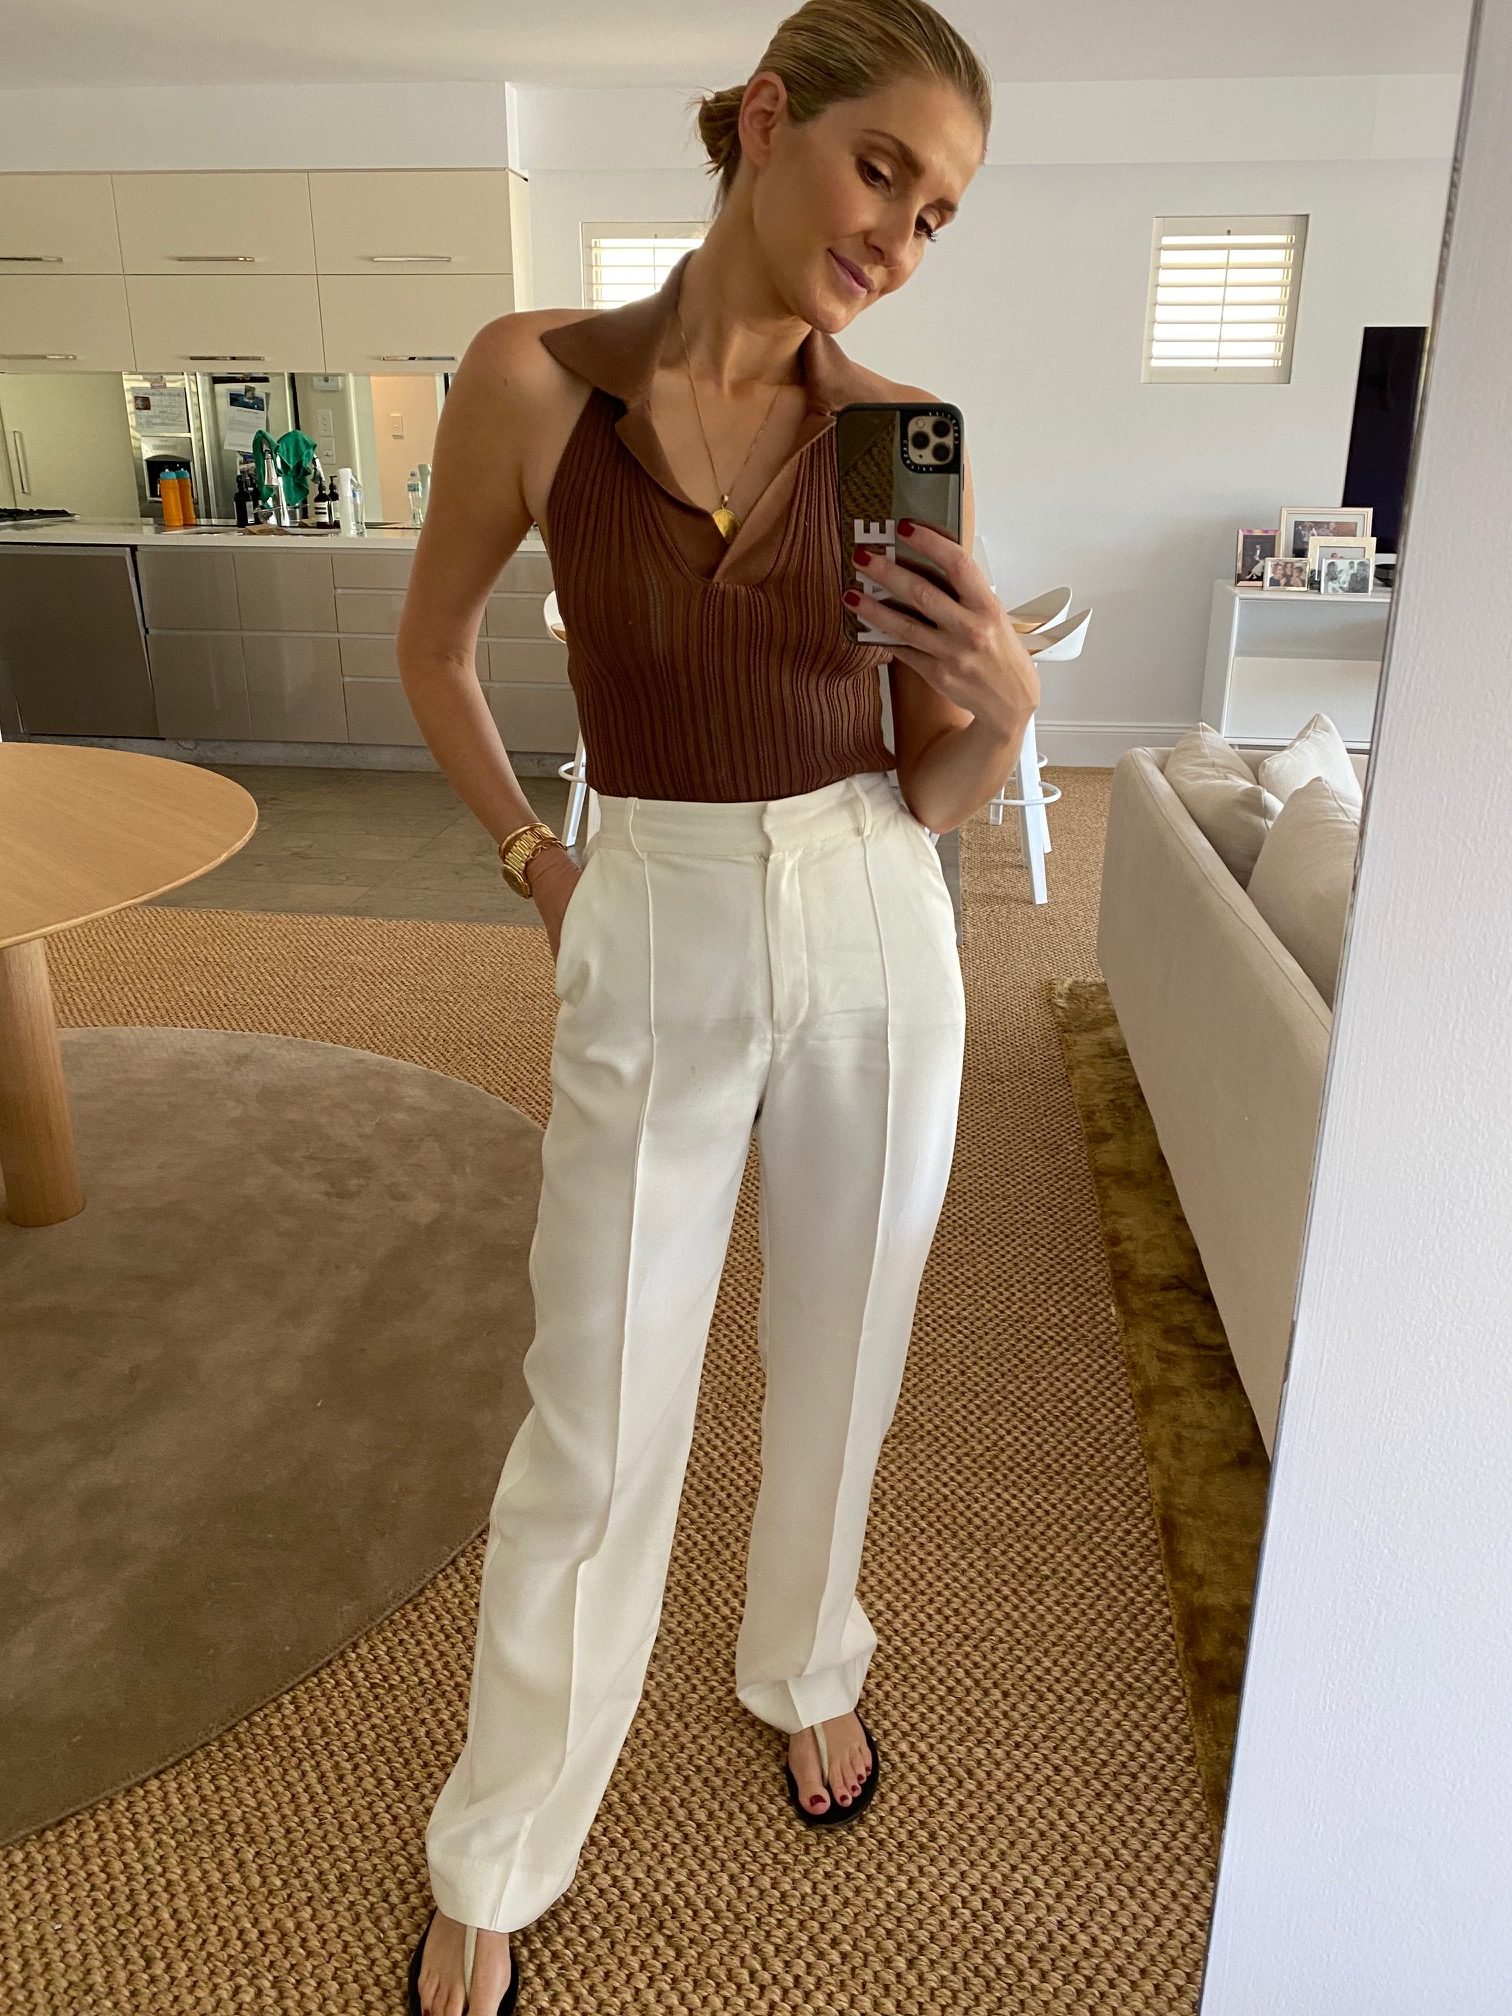 Style tailored pants the cool way - Kate Waterhouse